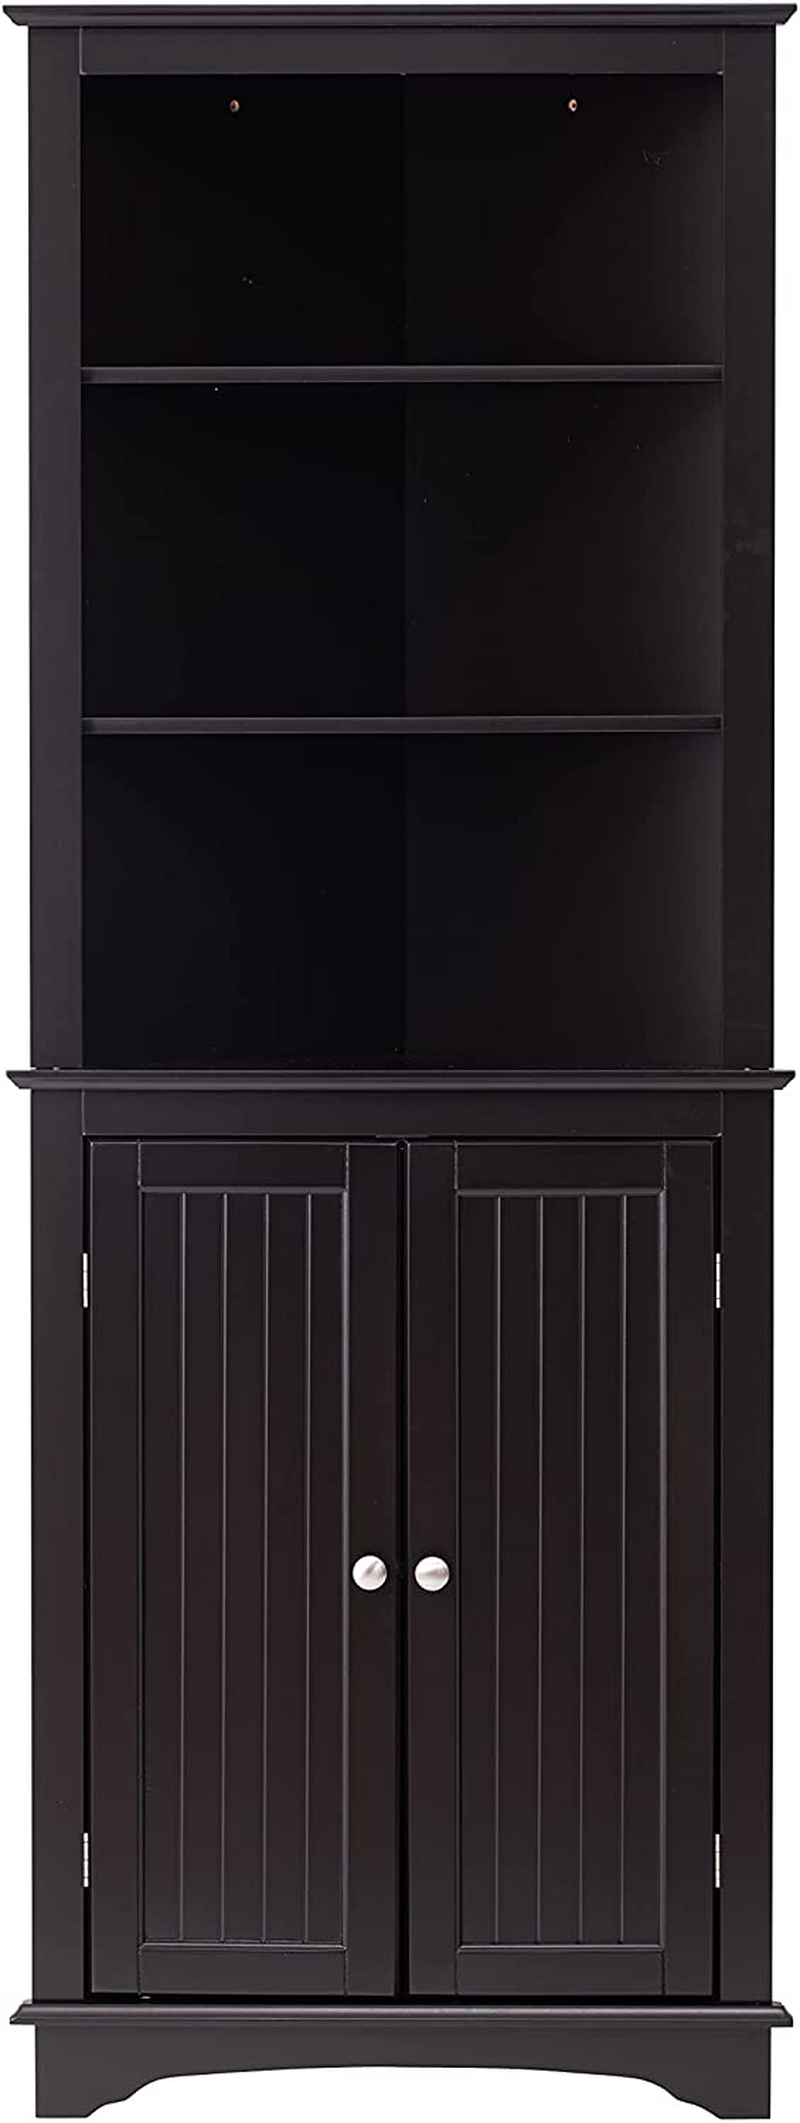 Spirich Home Tall Corner Cabinet with Two Doors and Three Tier Shelves, Free Standing Corner Storage Cabinet for Bathroom, Kitchen, Living Room or Bedroom, Espresso